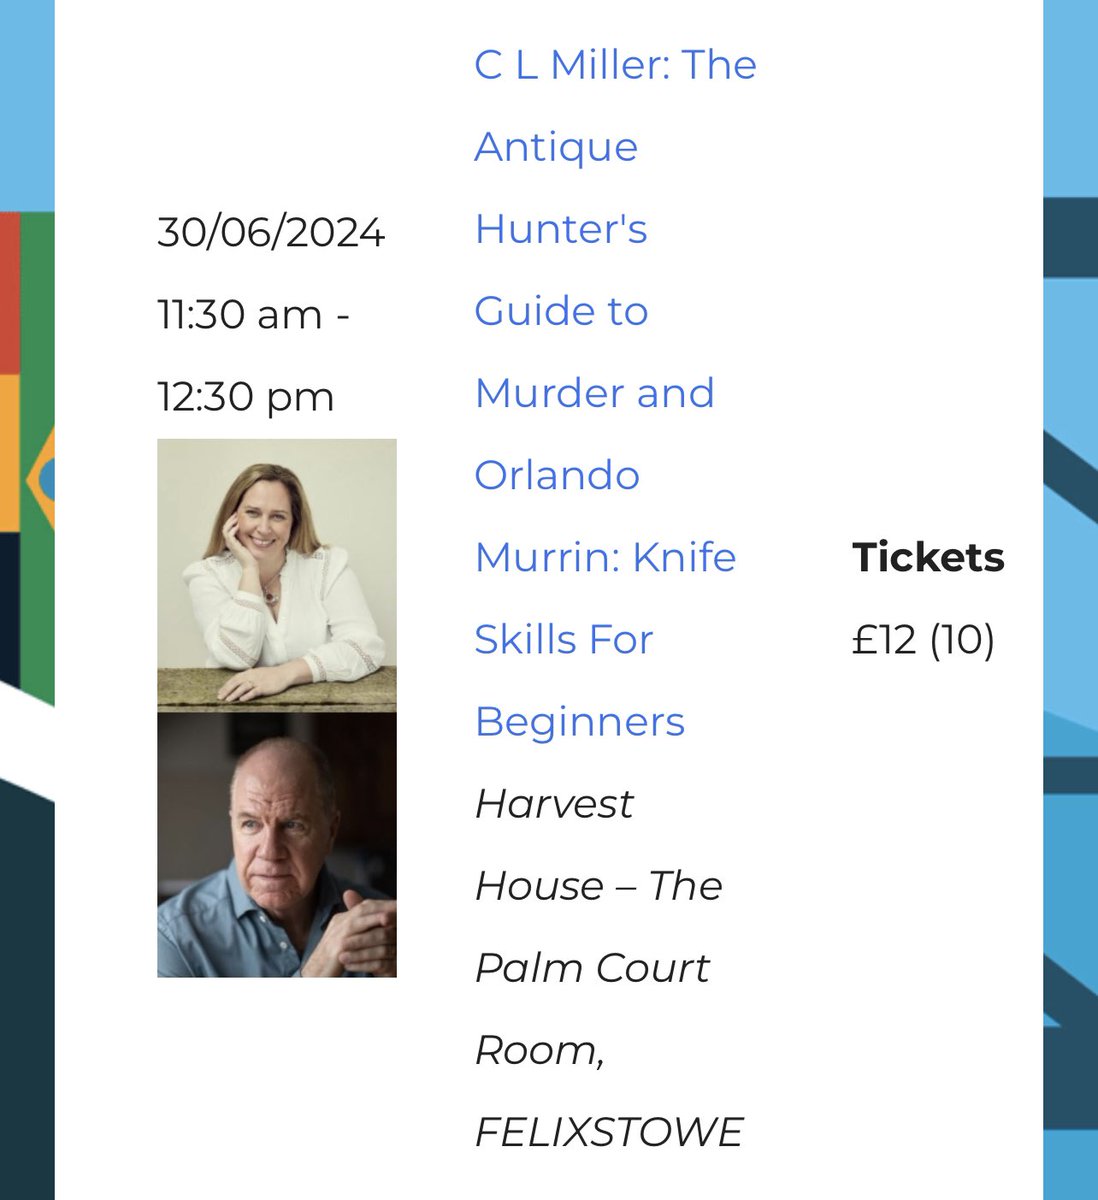 Come and hear me and @orlandomurrin at @felixstowebook on 30th June - chatting about crime fiction / cookery / antiques 🥰